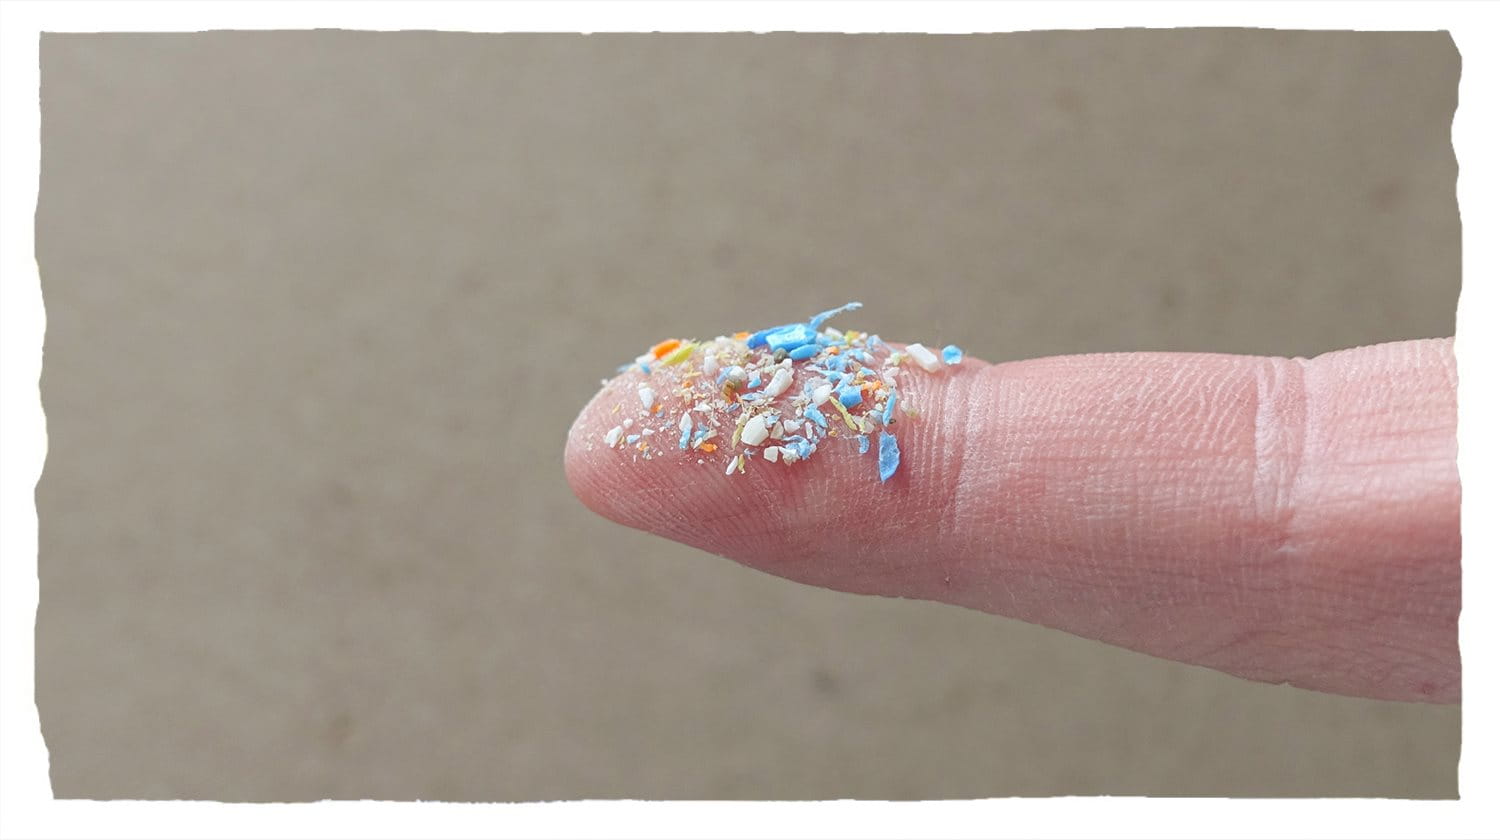 Plastic fragments visible on the tip of a finger